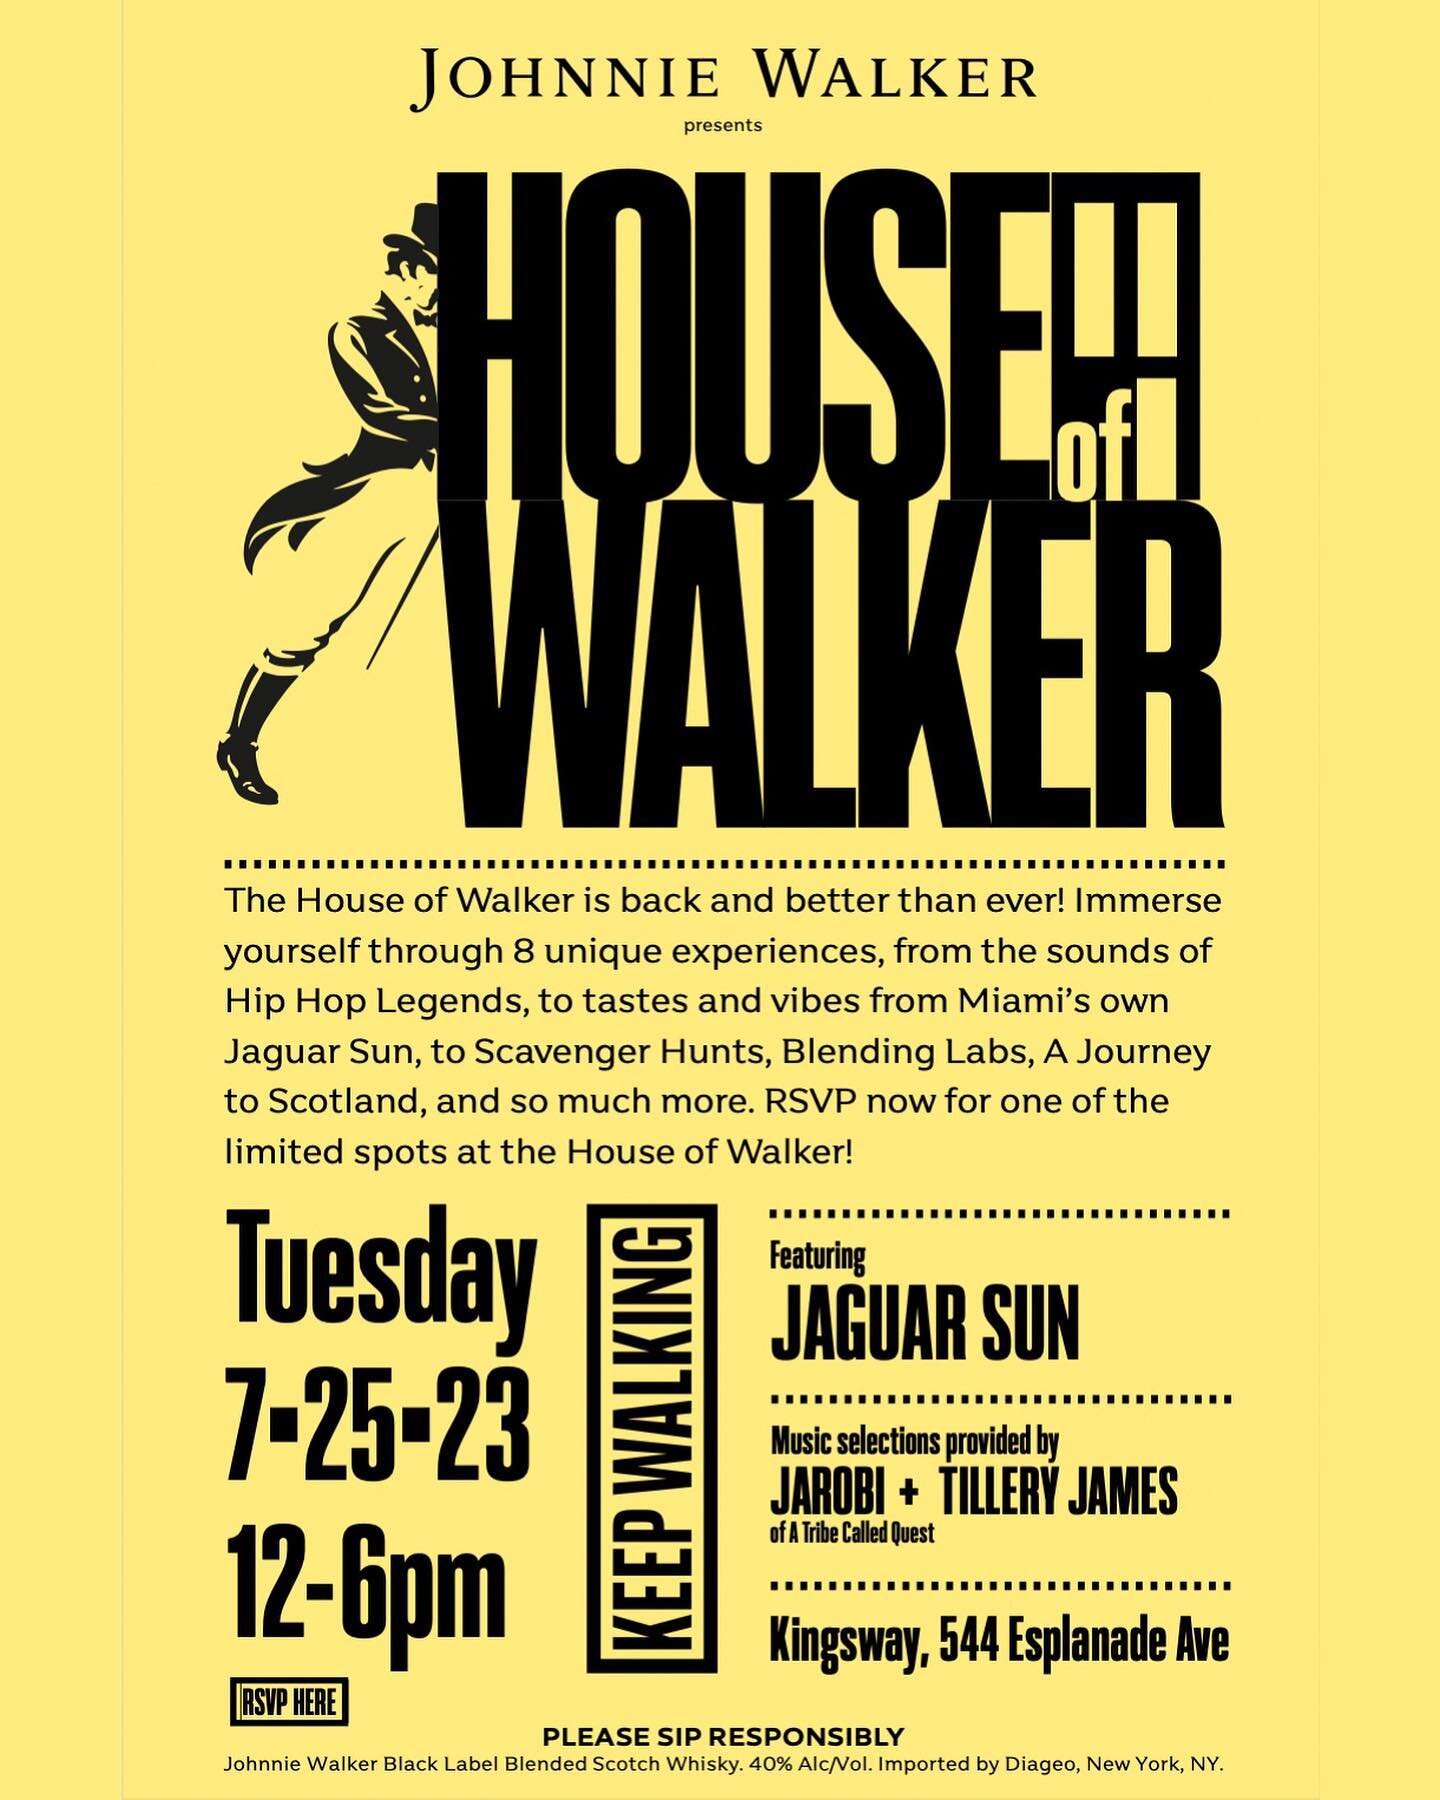 We're headed to @tales_of_the_cocktail and bringing the vibes to New Orleans! Catch us at The House of Walker tomorrow from 12 to 6PM where we will be slinging cocktails and shucking oysters, alongside guest DJs Jarobi White and Tillery James. RSVP a